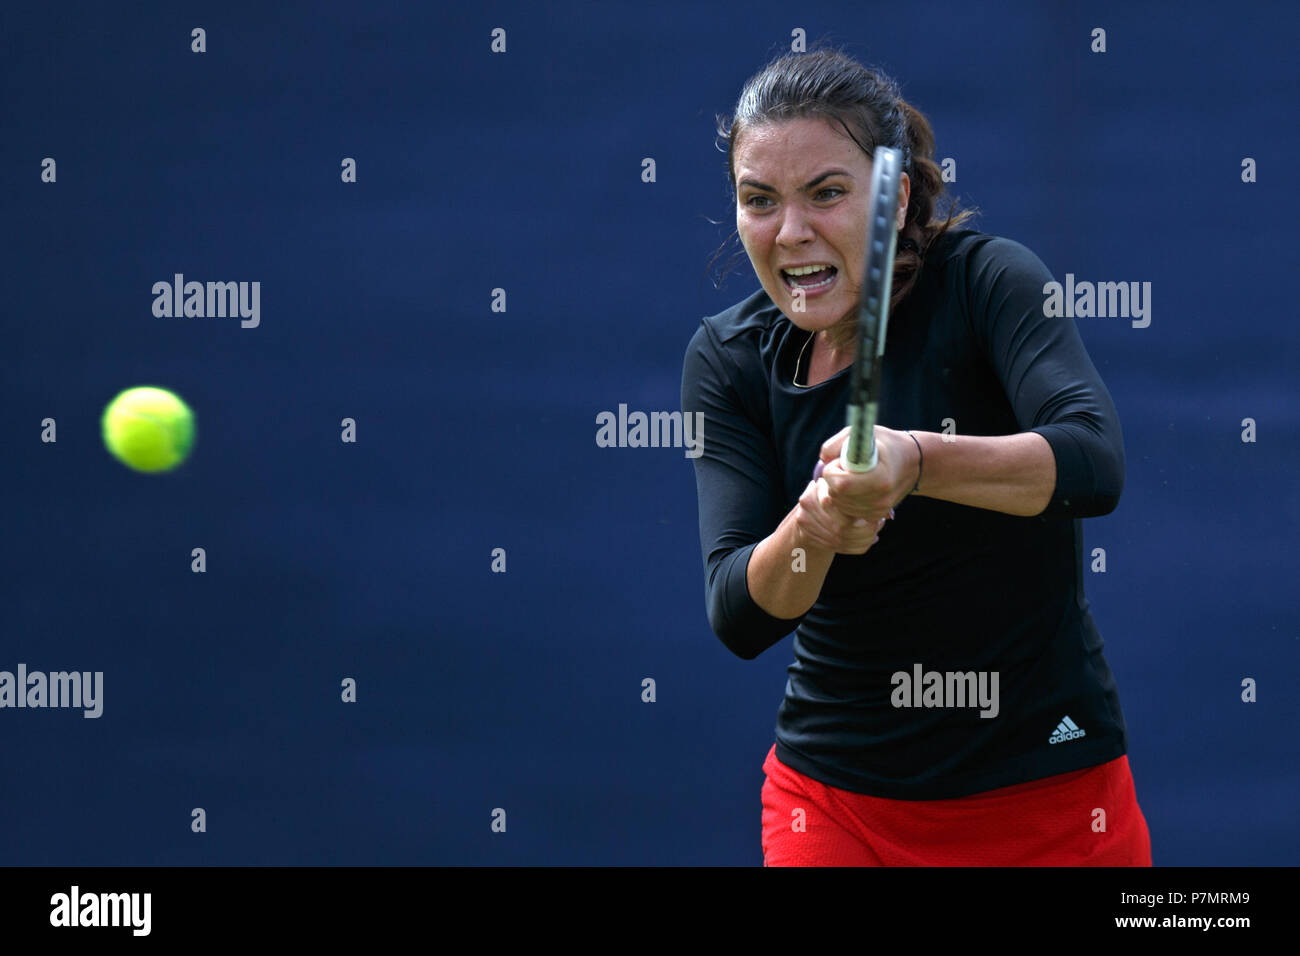 Elena-Gabriela Ruse plays a shot during a match in 2018. Ruse is a professional female tennis player from Romania. Stock Photo